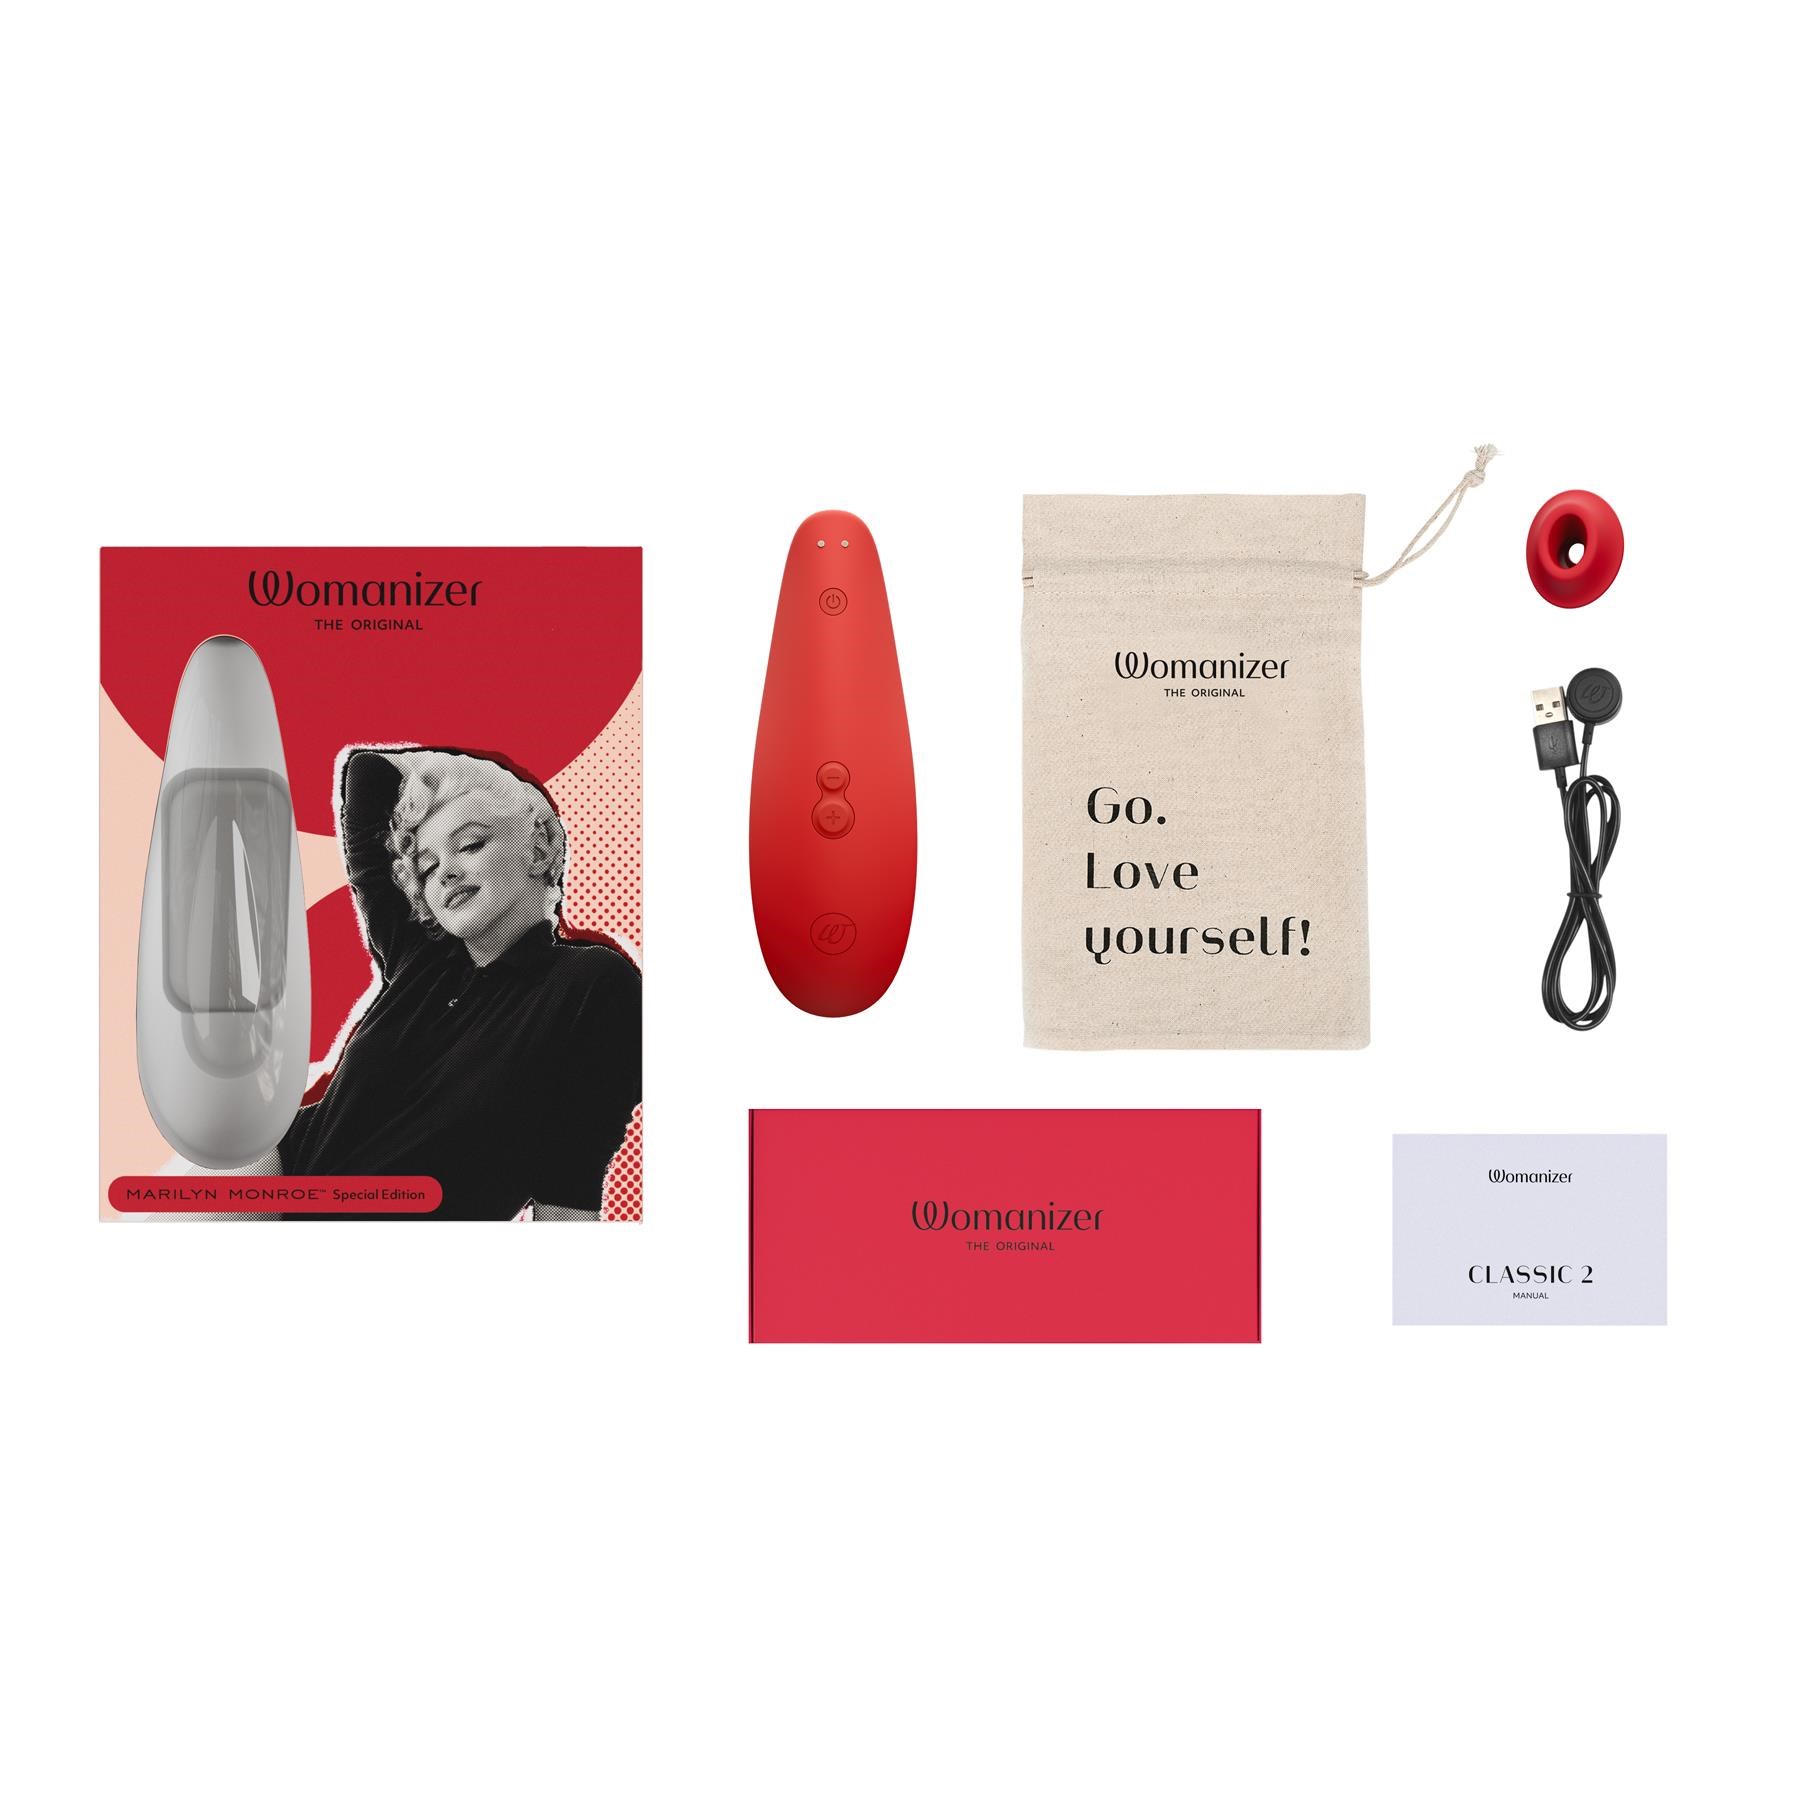 Womanizer Classic - Marylin Monroe Edition- All Components and Packaging